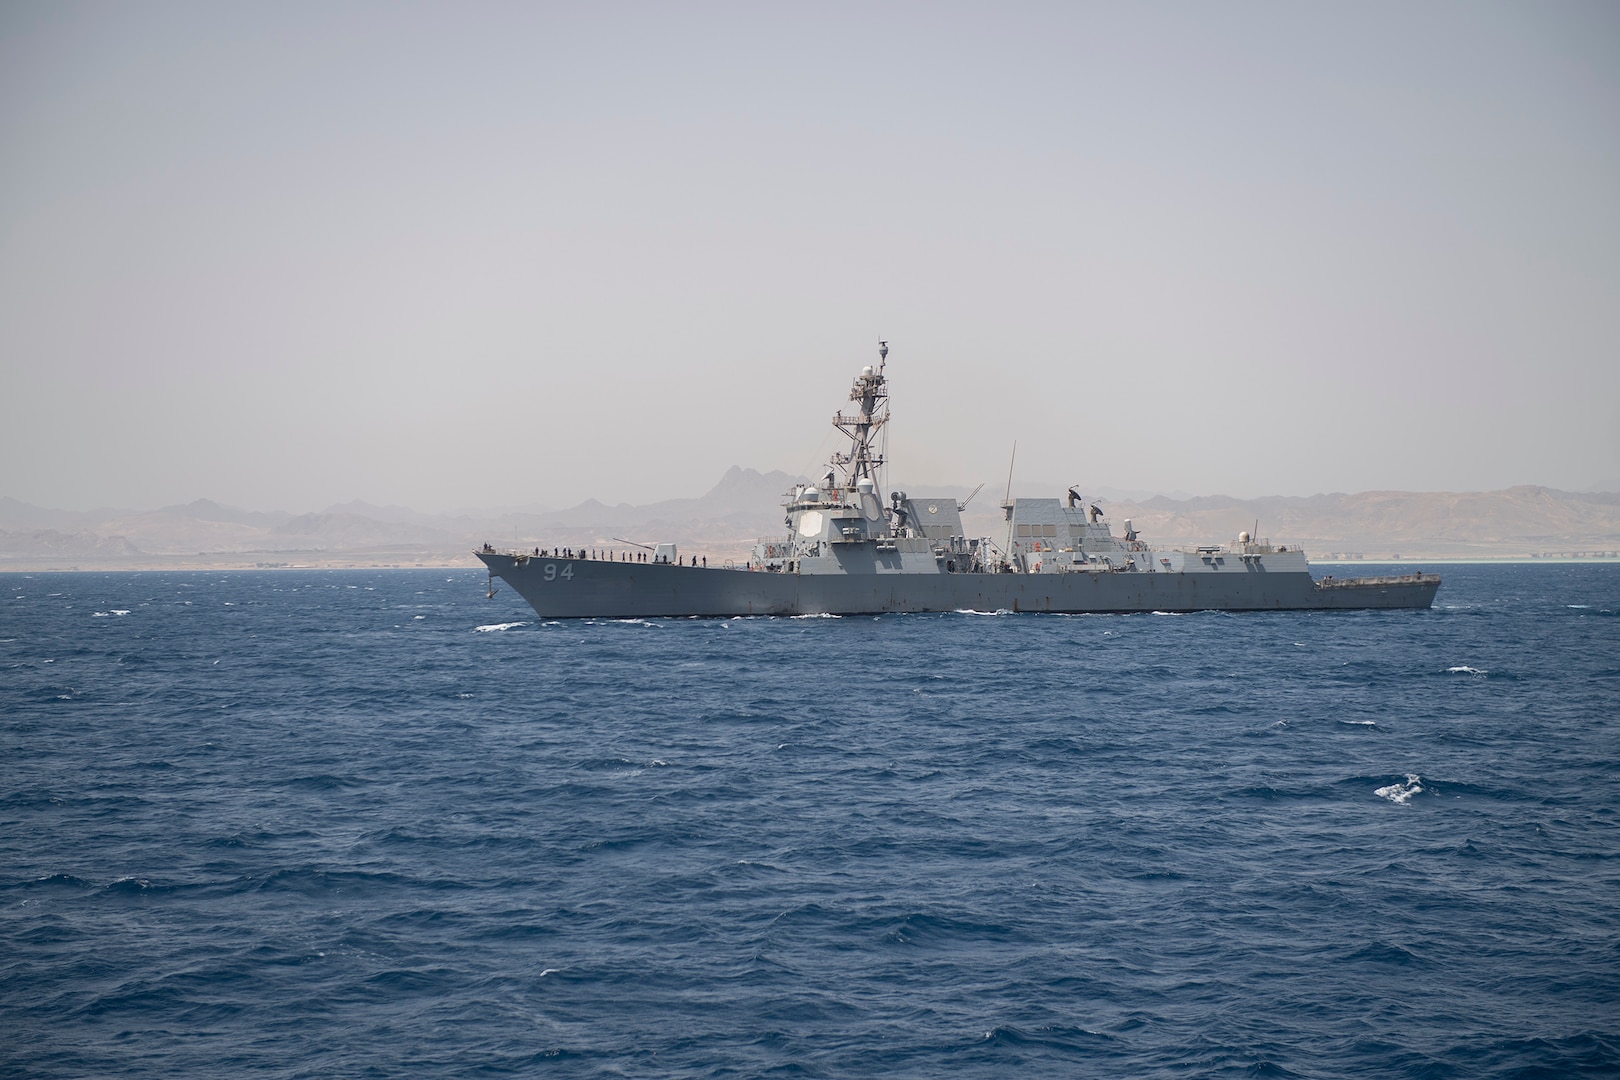 The Arleigh Burke-class guided-missile destroyer USS Nitze (DDG 94) departs Safaga, Egypt after a port visit, July 20, 2019.